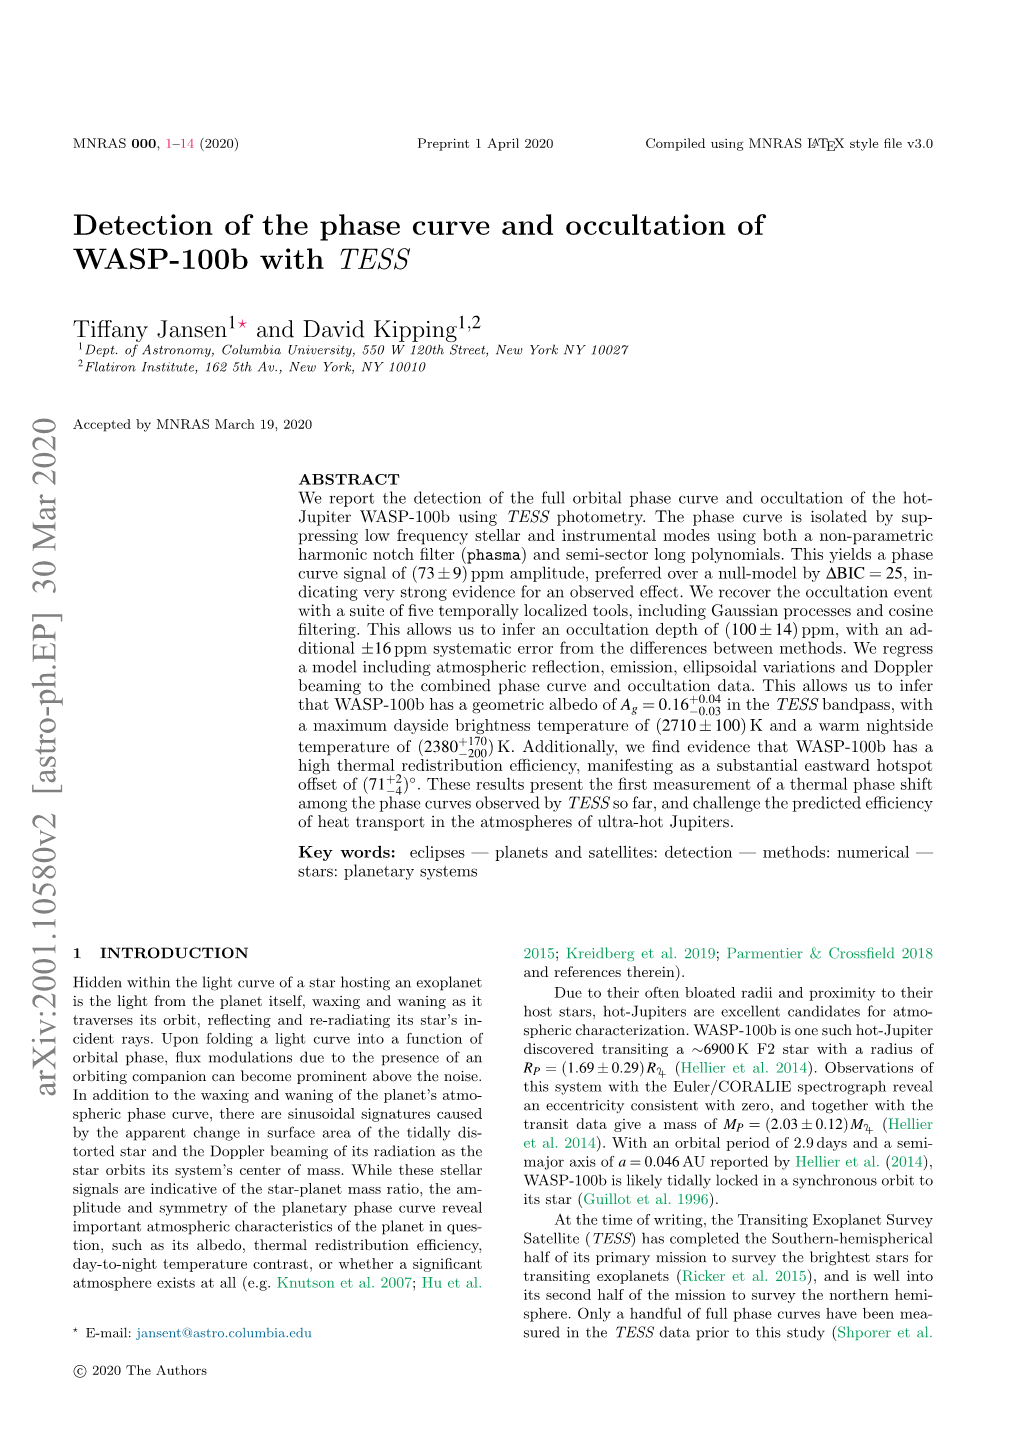 Phase Curve and Occultation of WASP-100B with TESS